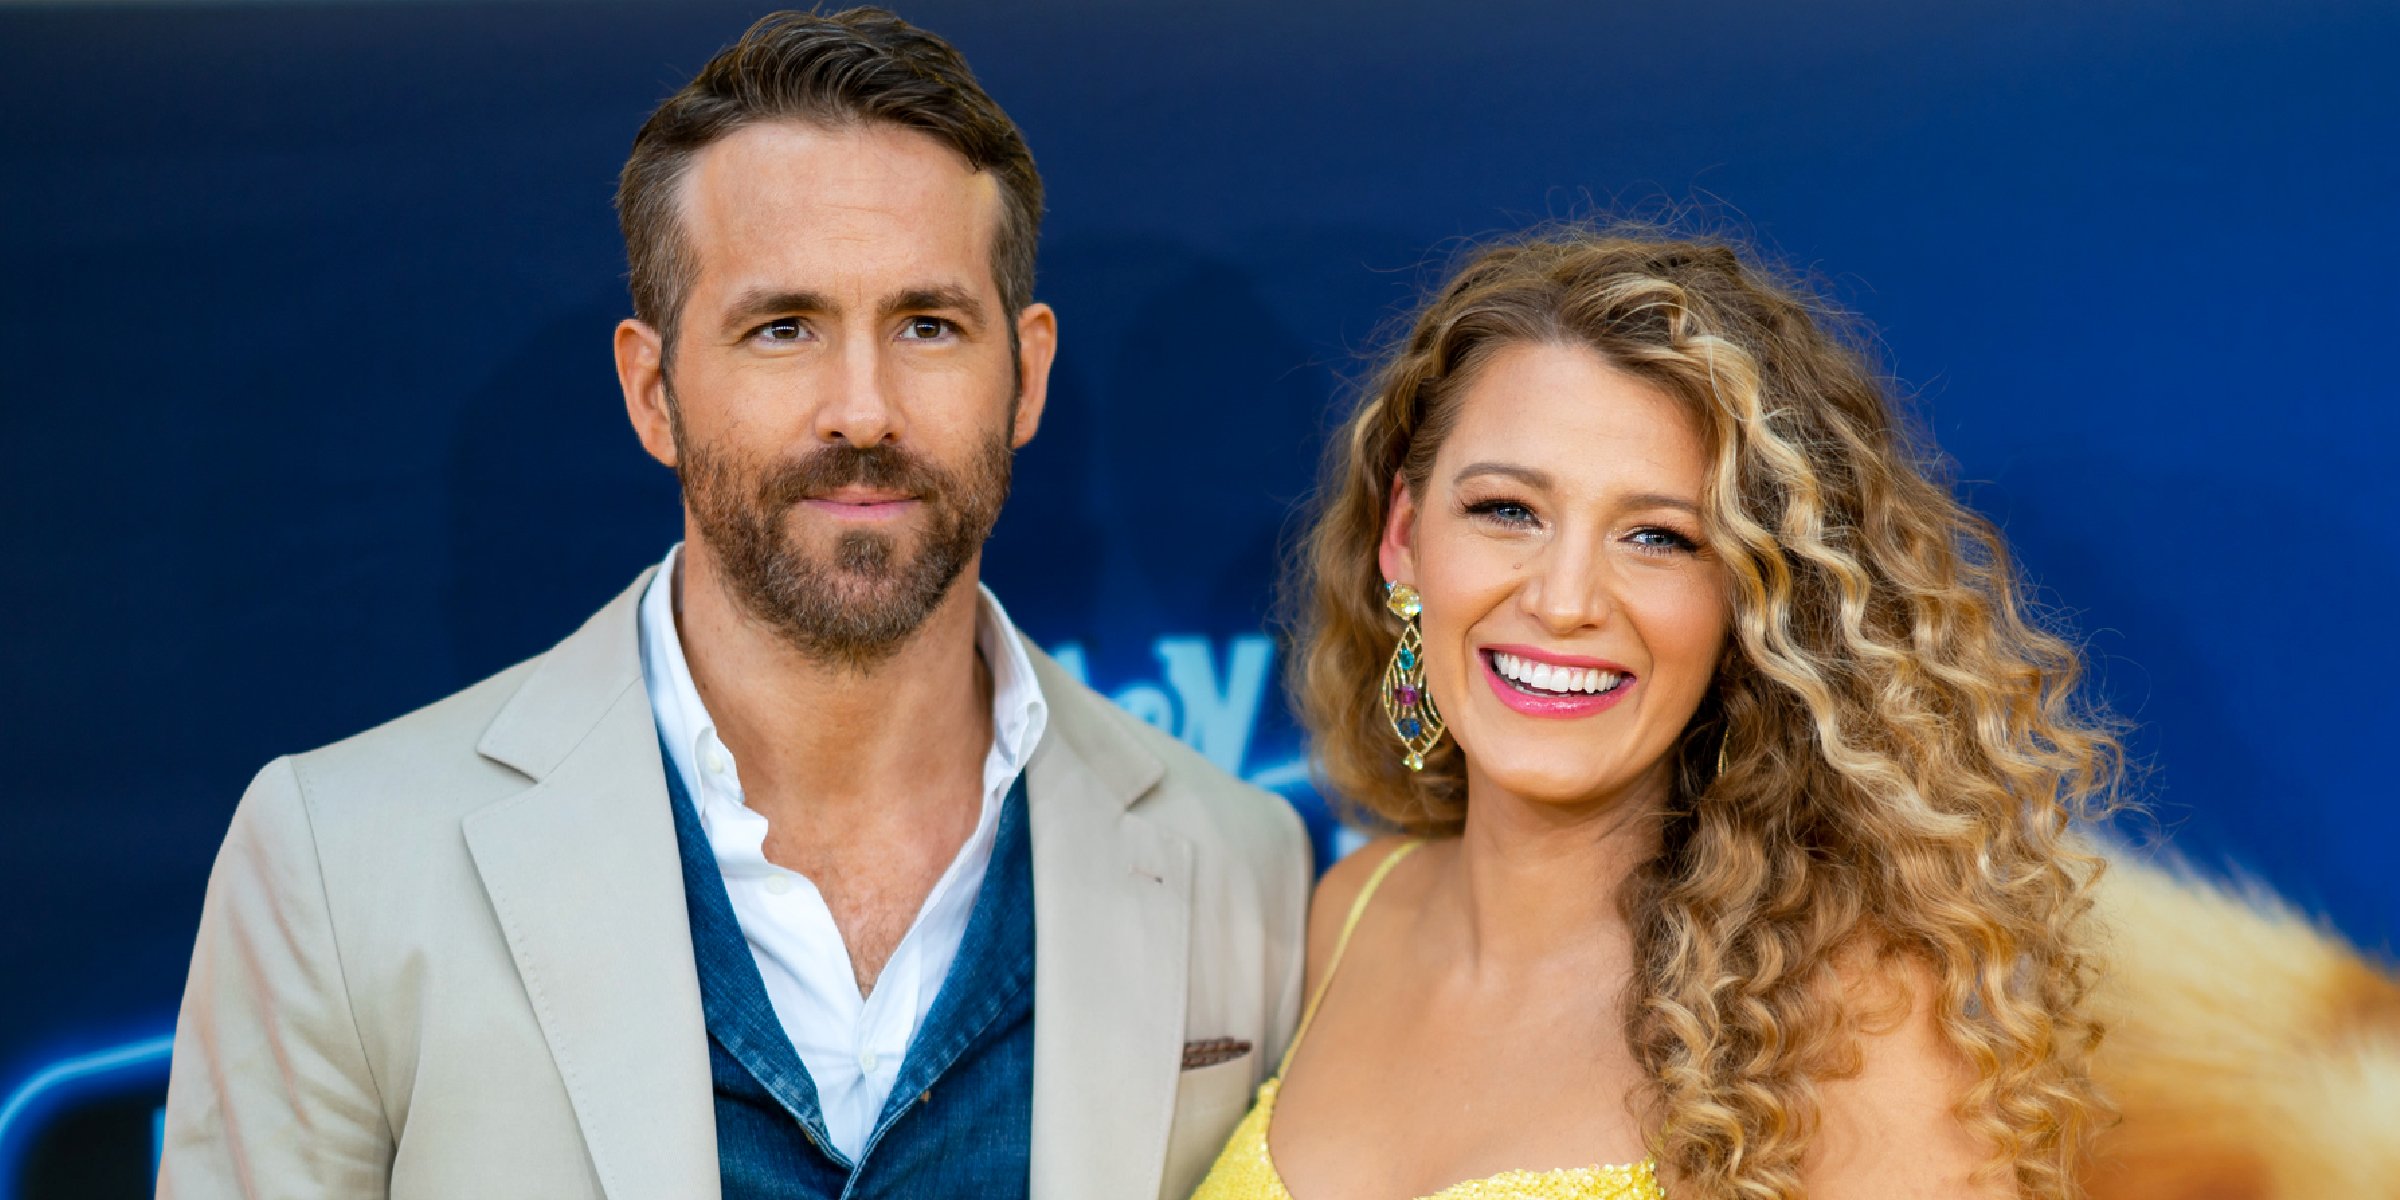 Ryan Reynolds and Blake Lively. | Source: Getty Images